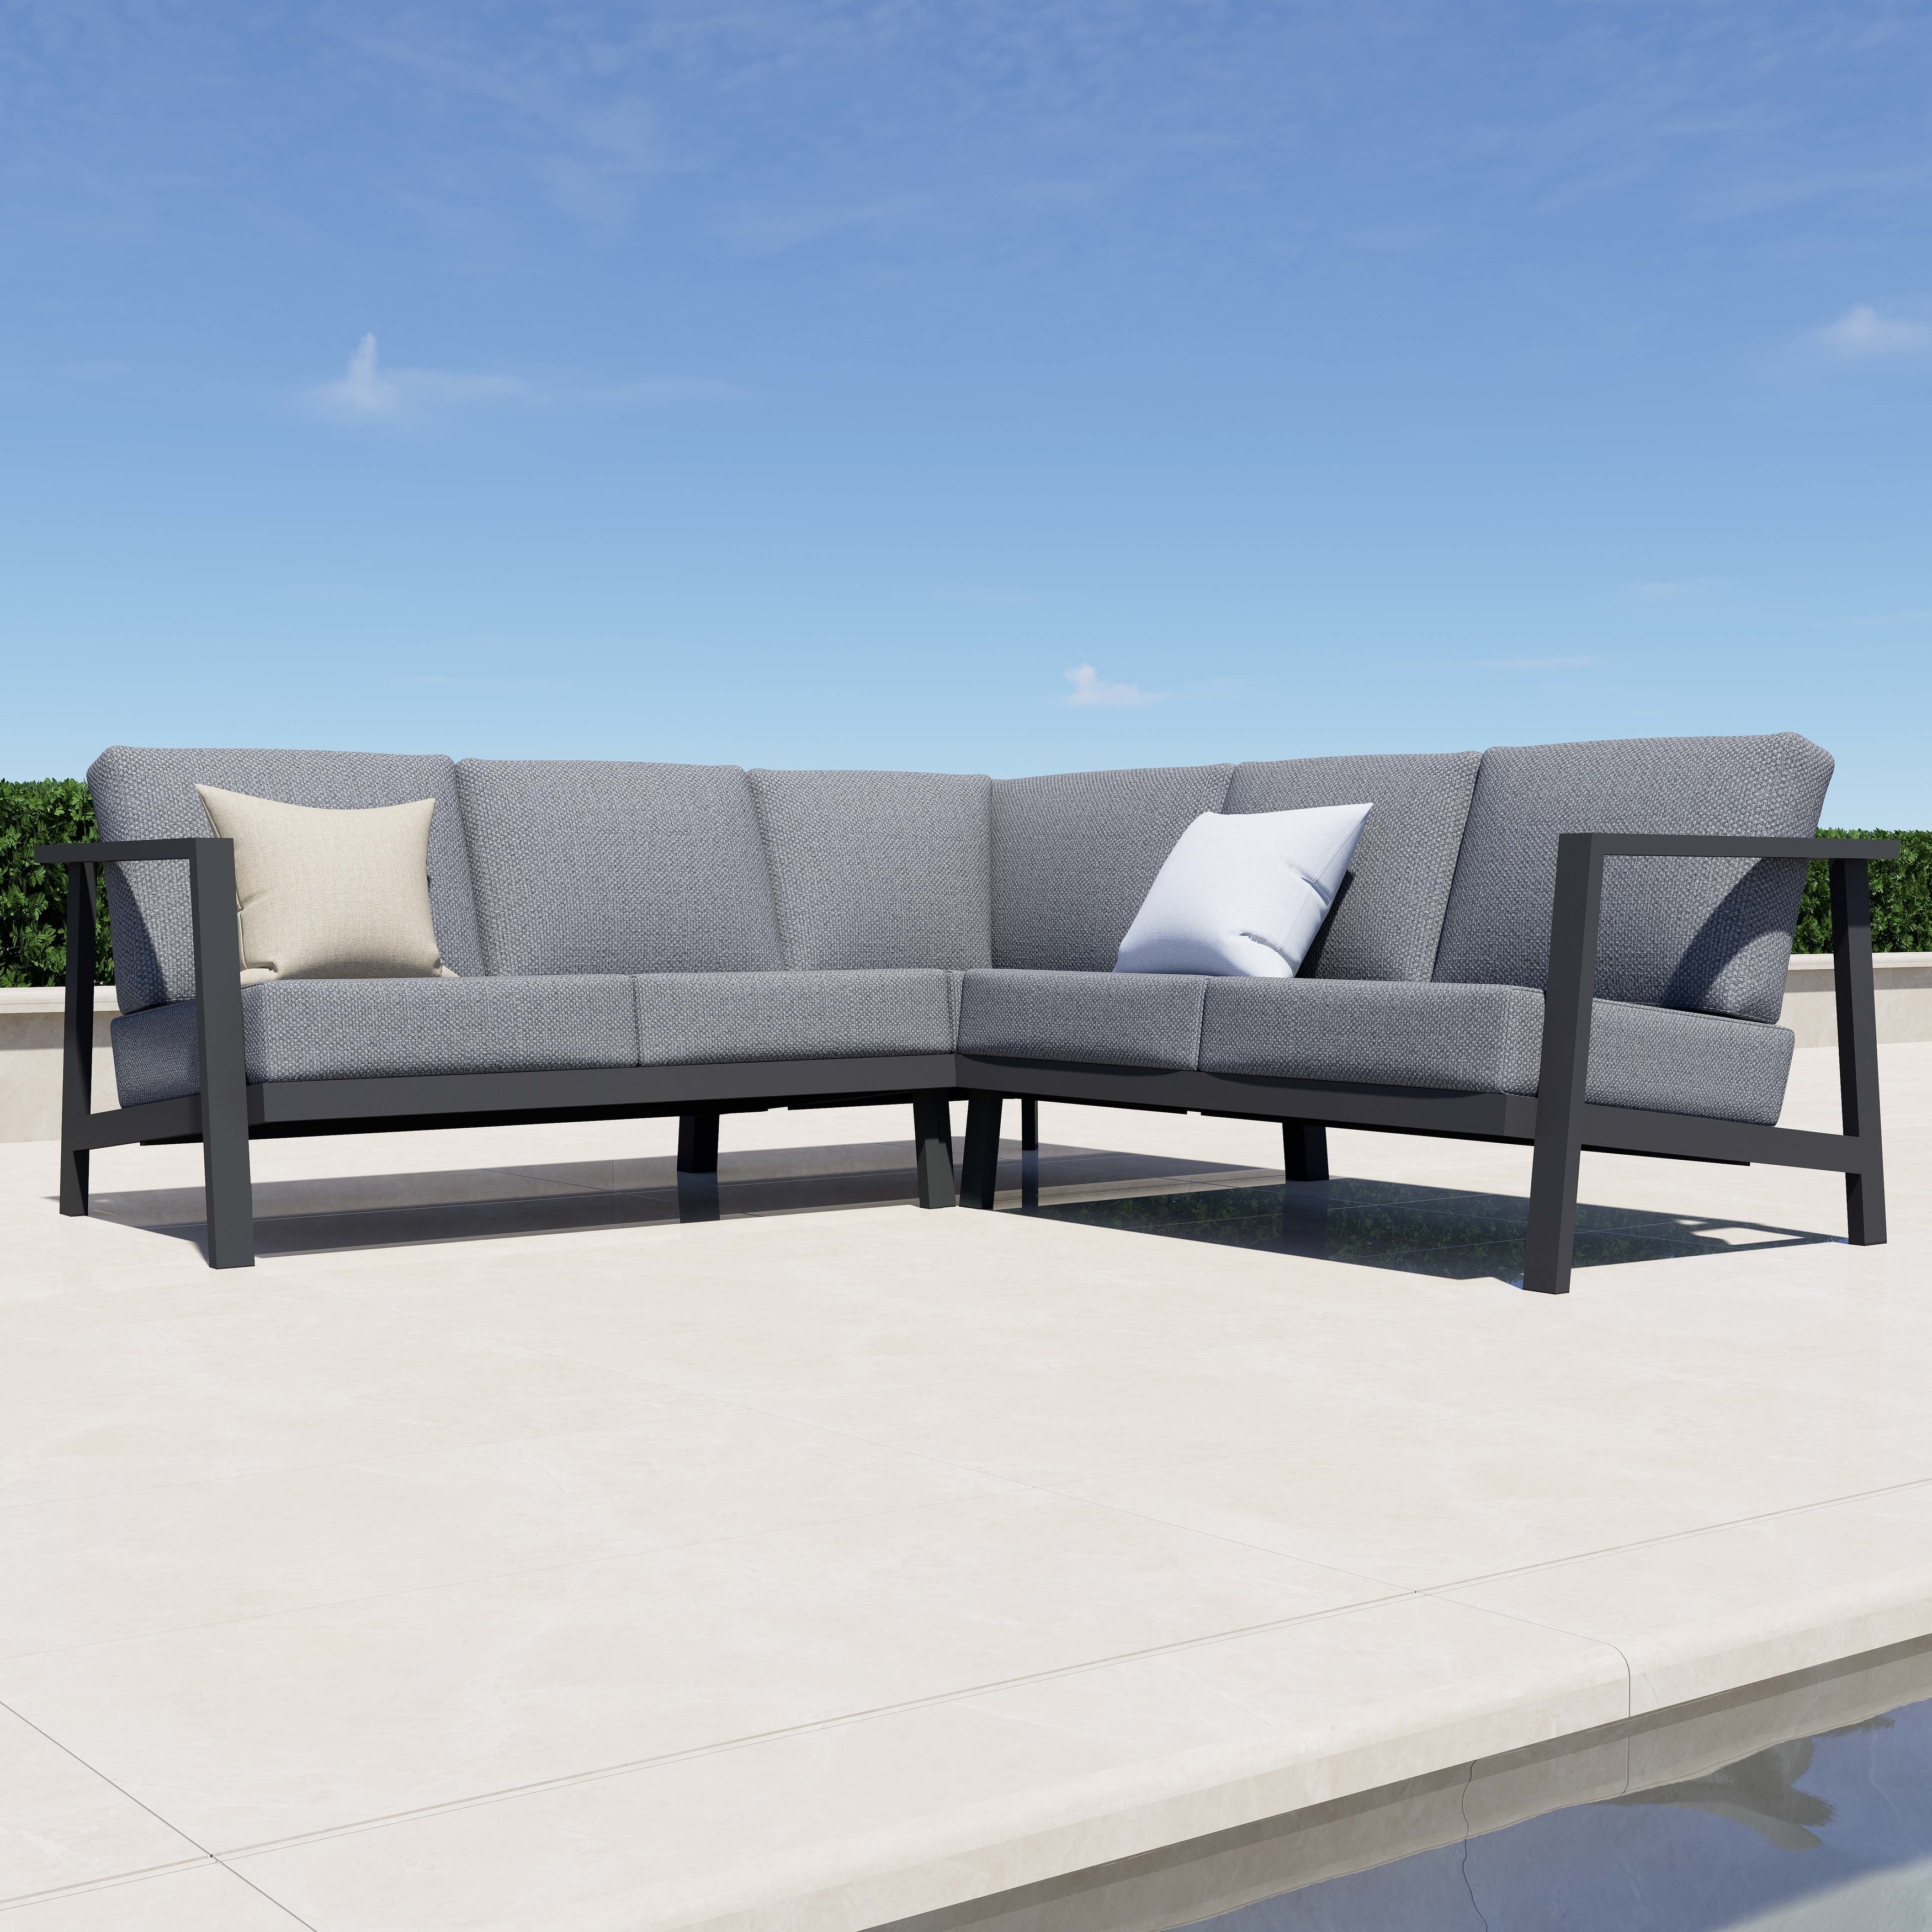 Solana 3-piece Deep Seating Sectional